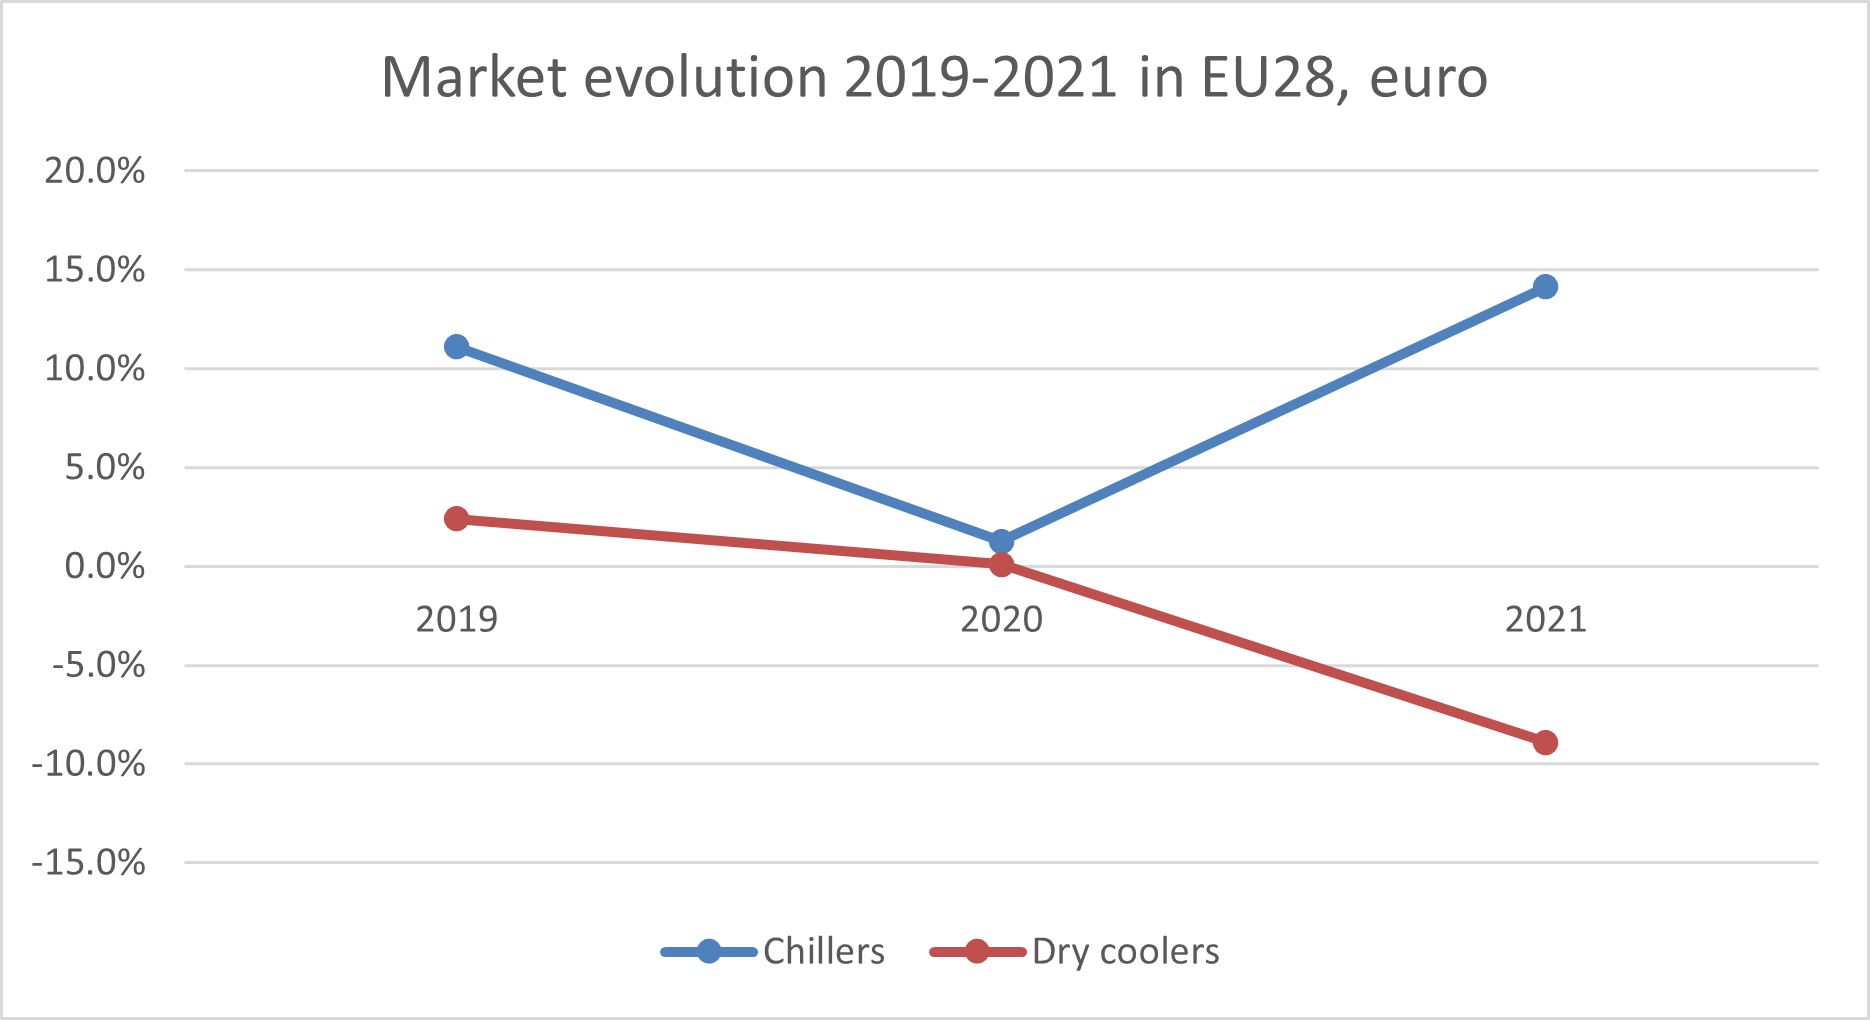 Chiller and dry cooler sales evolution in EU28, 2019-2021, from Eurovent Market intelligence